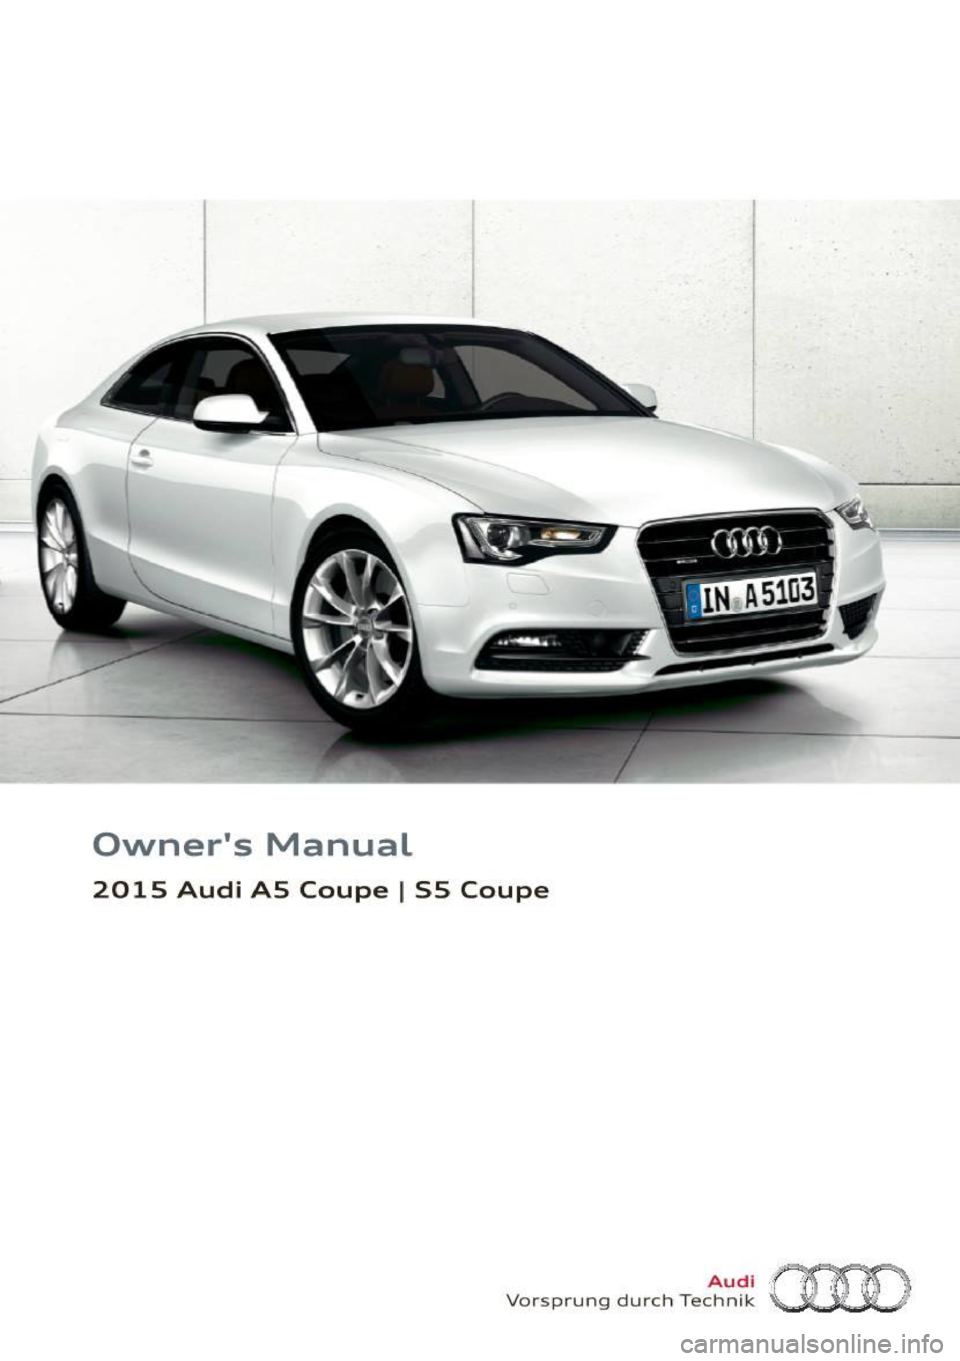 AUDI A5 COUPE 2015  Owners Manual Owners  Manual 
2015  Audi  AS  Coupe I 55  Coupe 
Vors prung  durch  Tee~~?~ (HD  